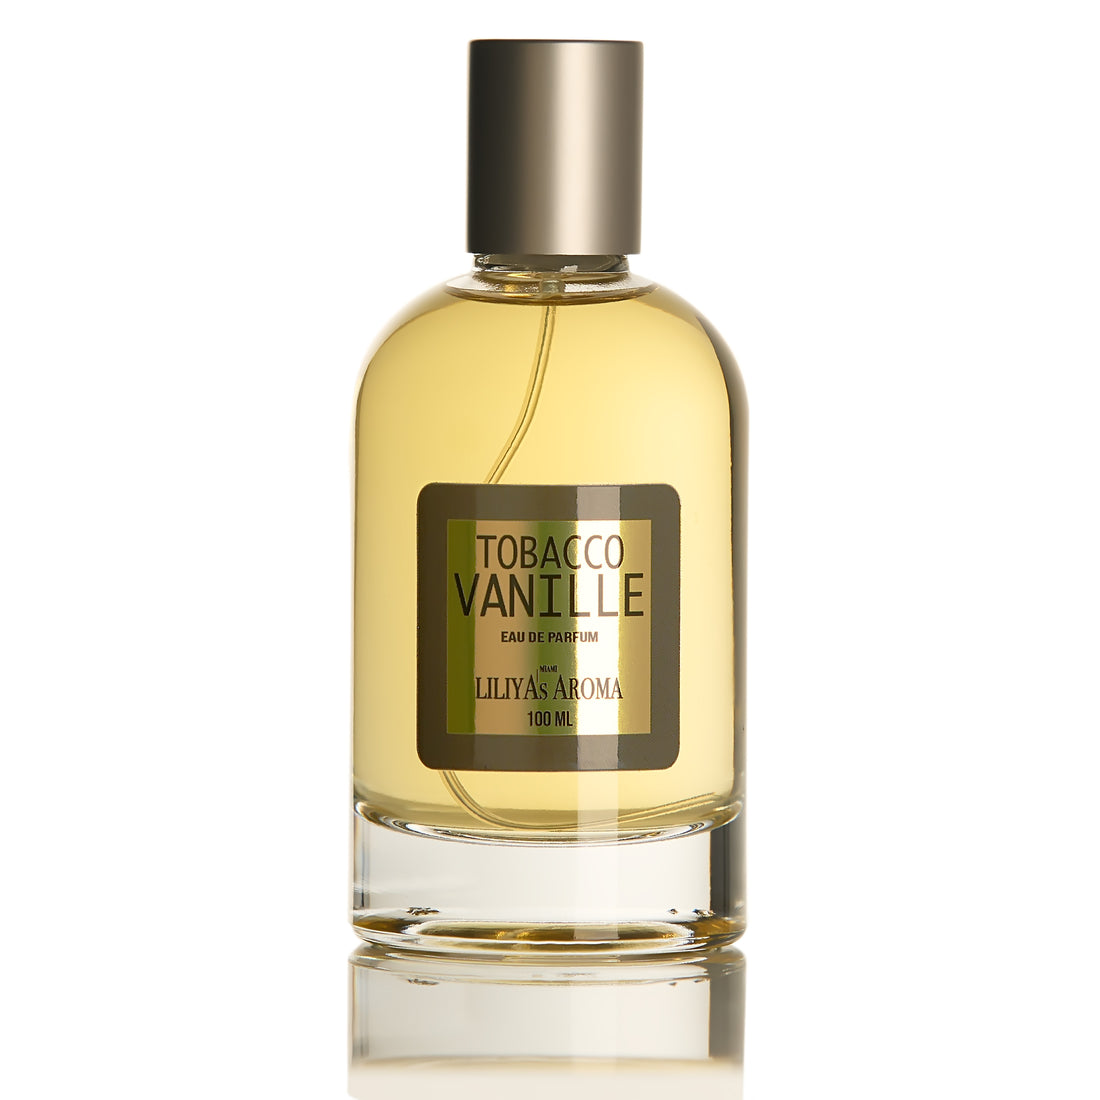 Oud-Couture ZARKOPERFUME perfume - a fragrance for women and men 2016